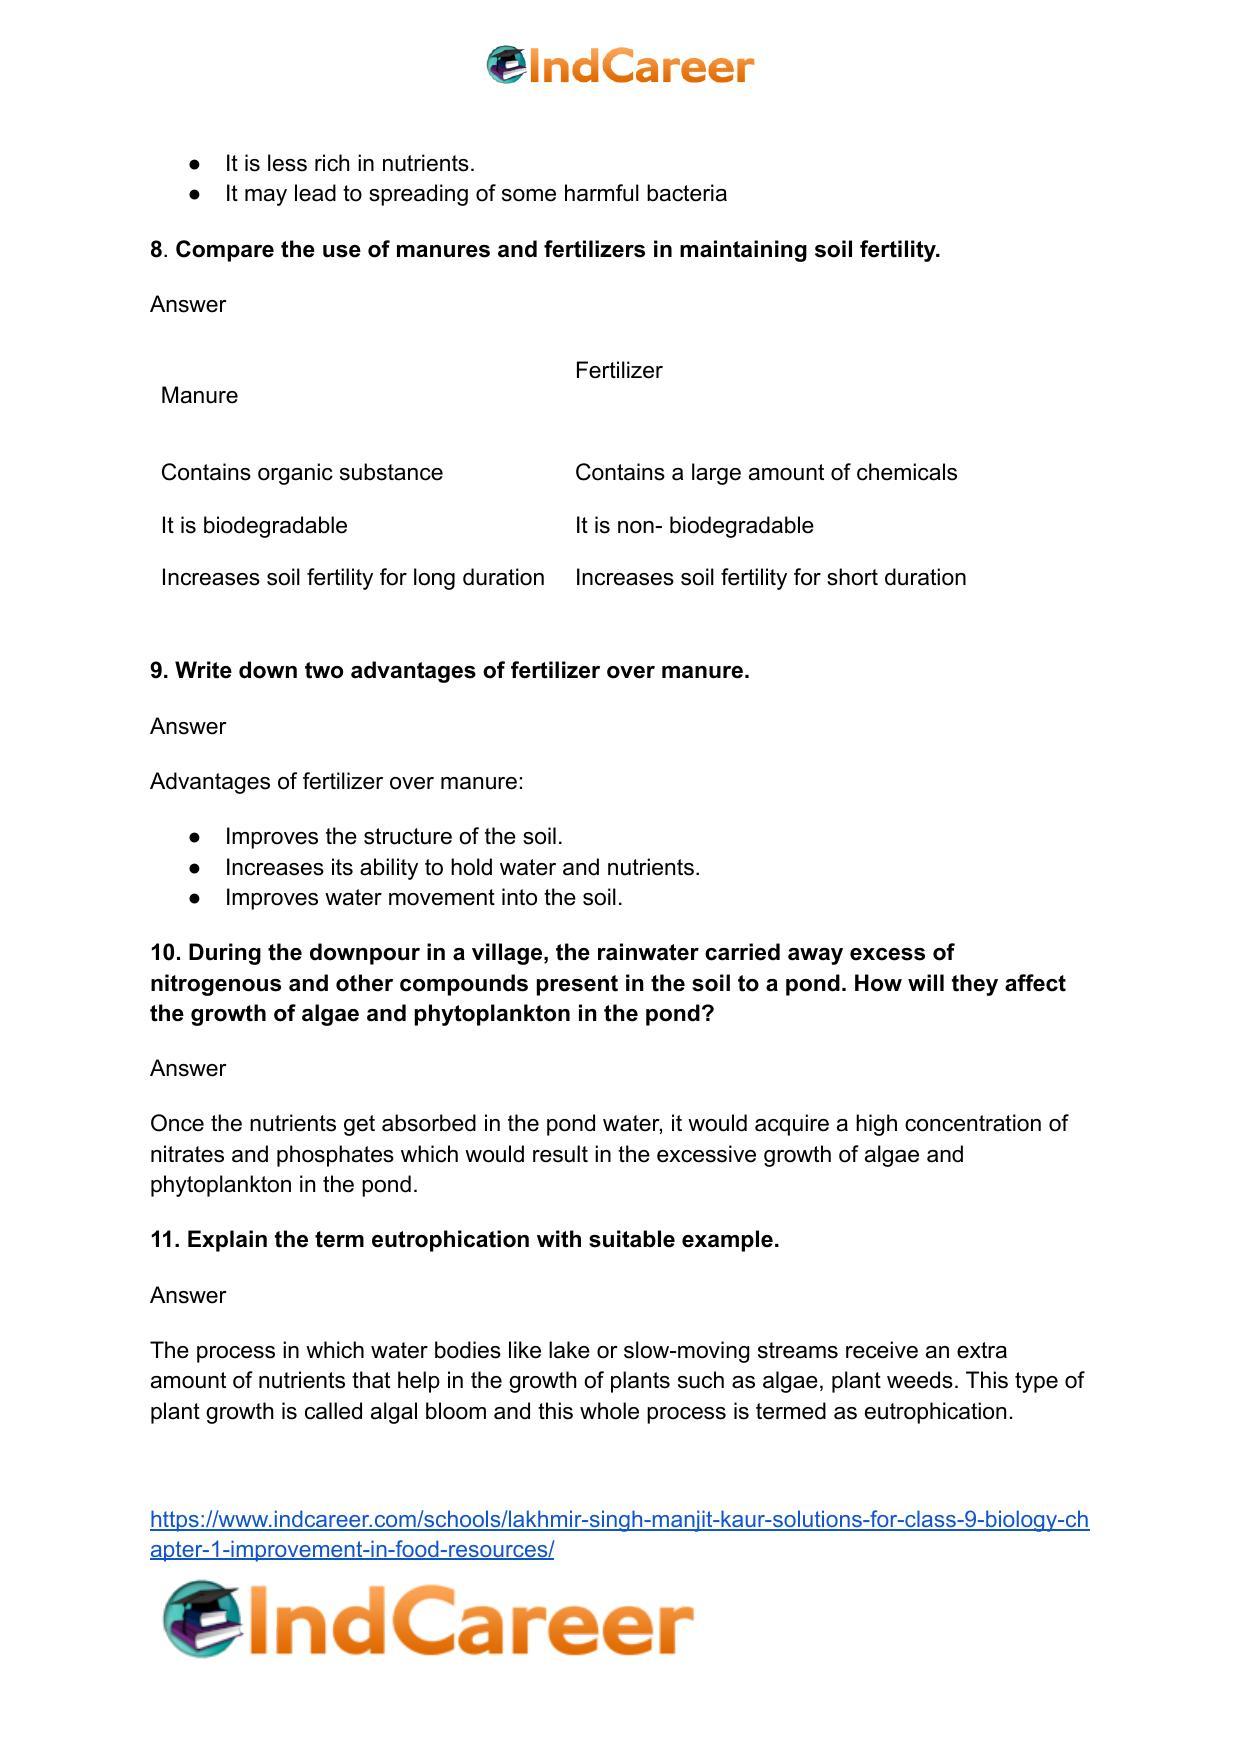 Lakhmir Singh Manjit Kaur  Solutions for Class 9 Biology: Chapter 1- Improvement In Food Resources - Page 4